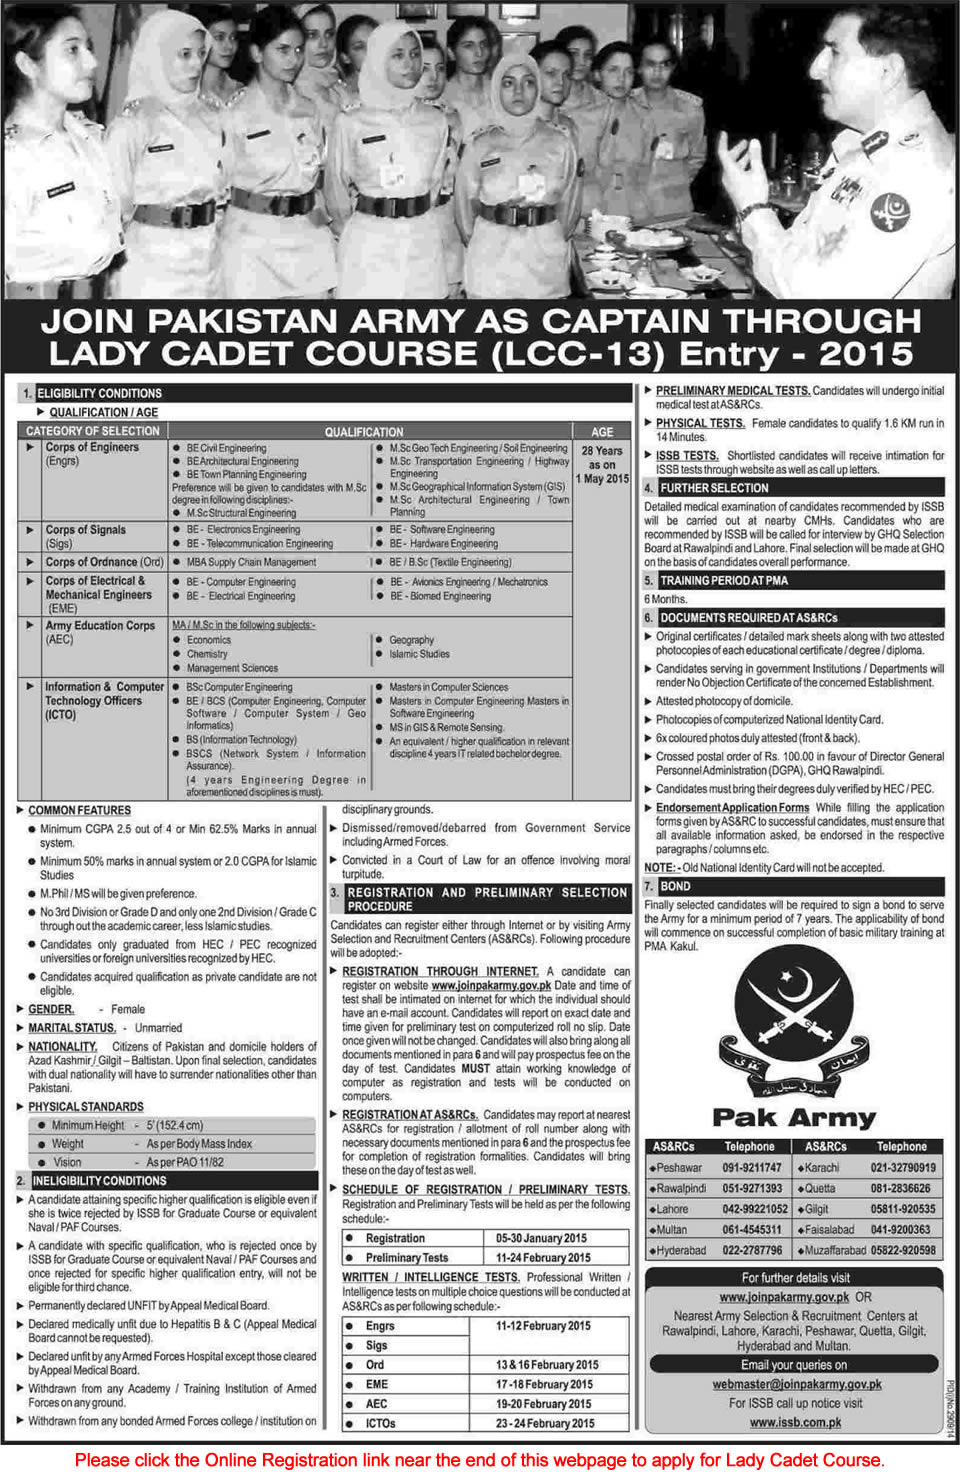 Lady Cadet Course 2015 Registration Online Join Pakistan Army as Captain through LCC-13 Entry